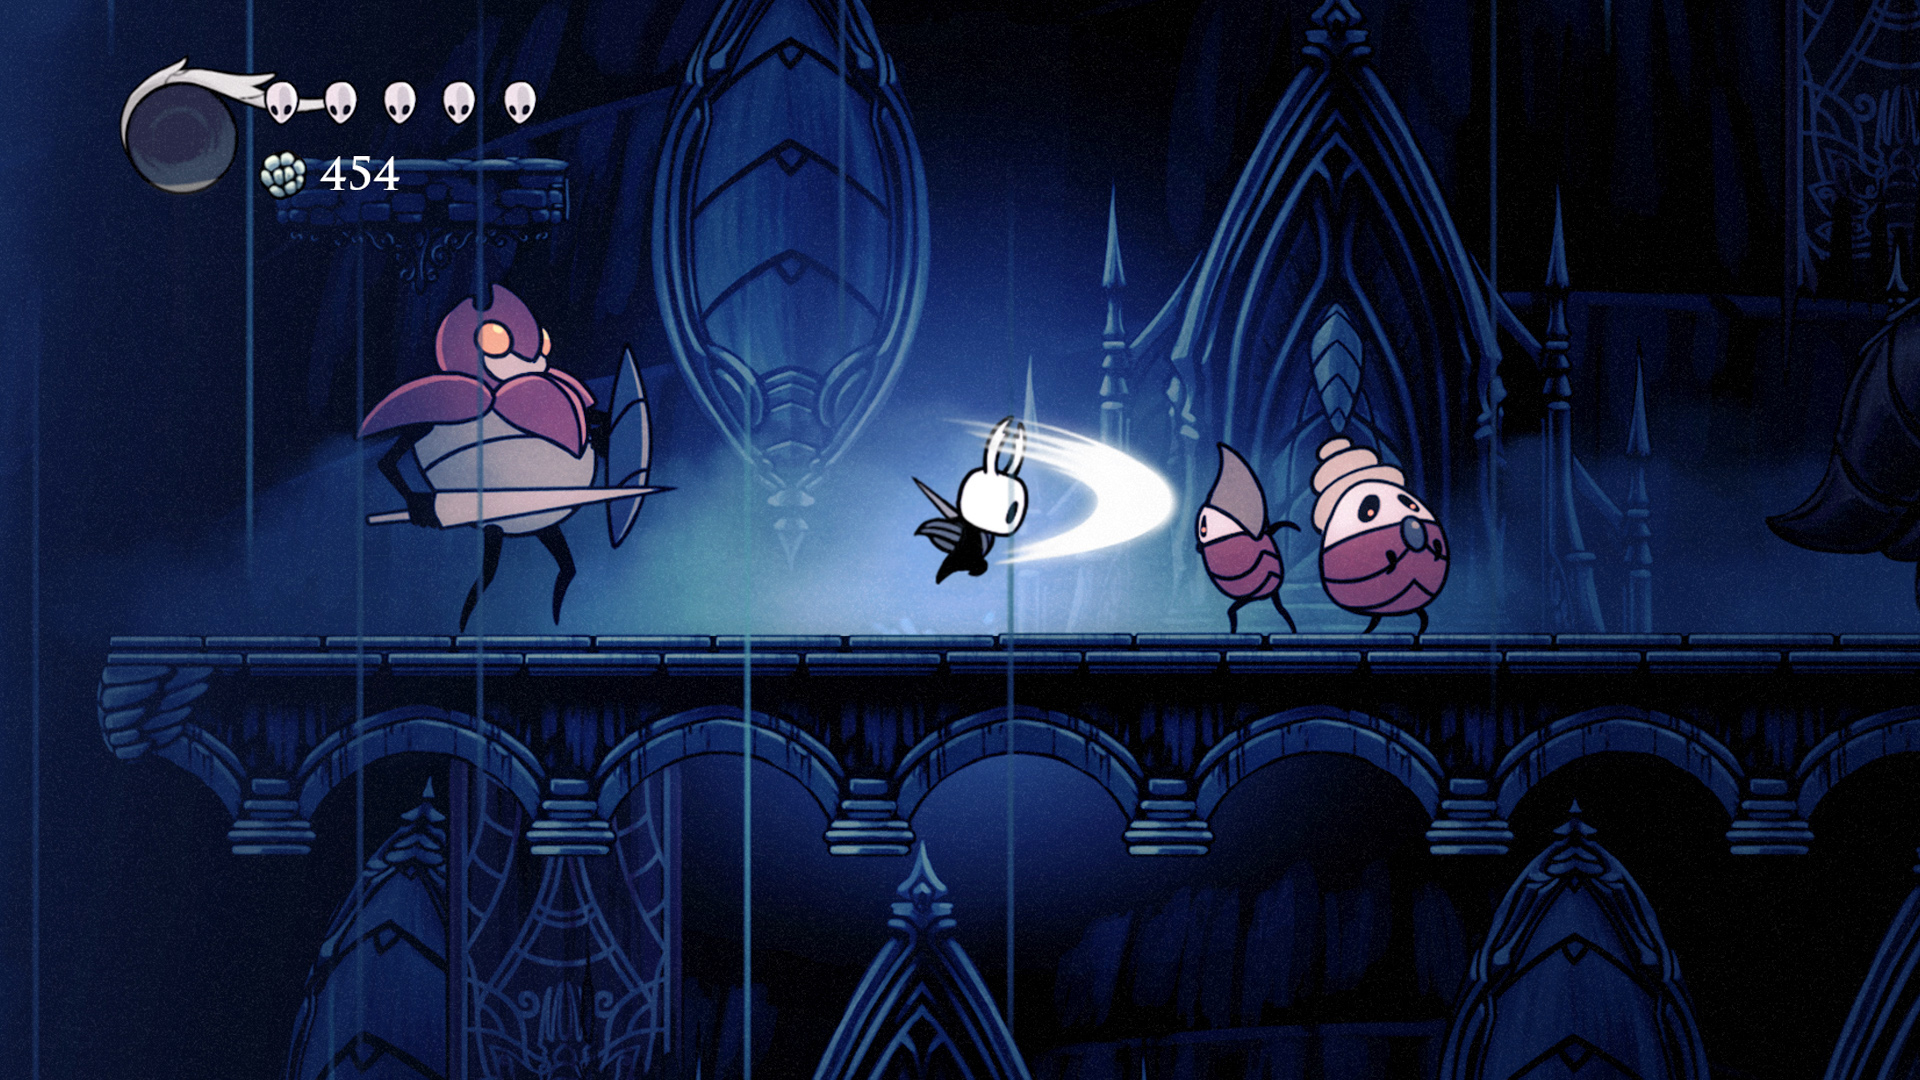 mac port review for hollow knight